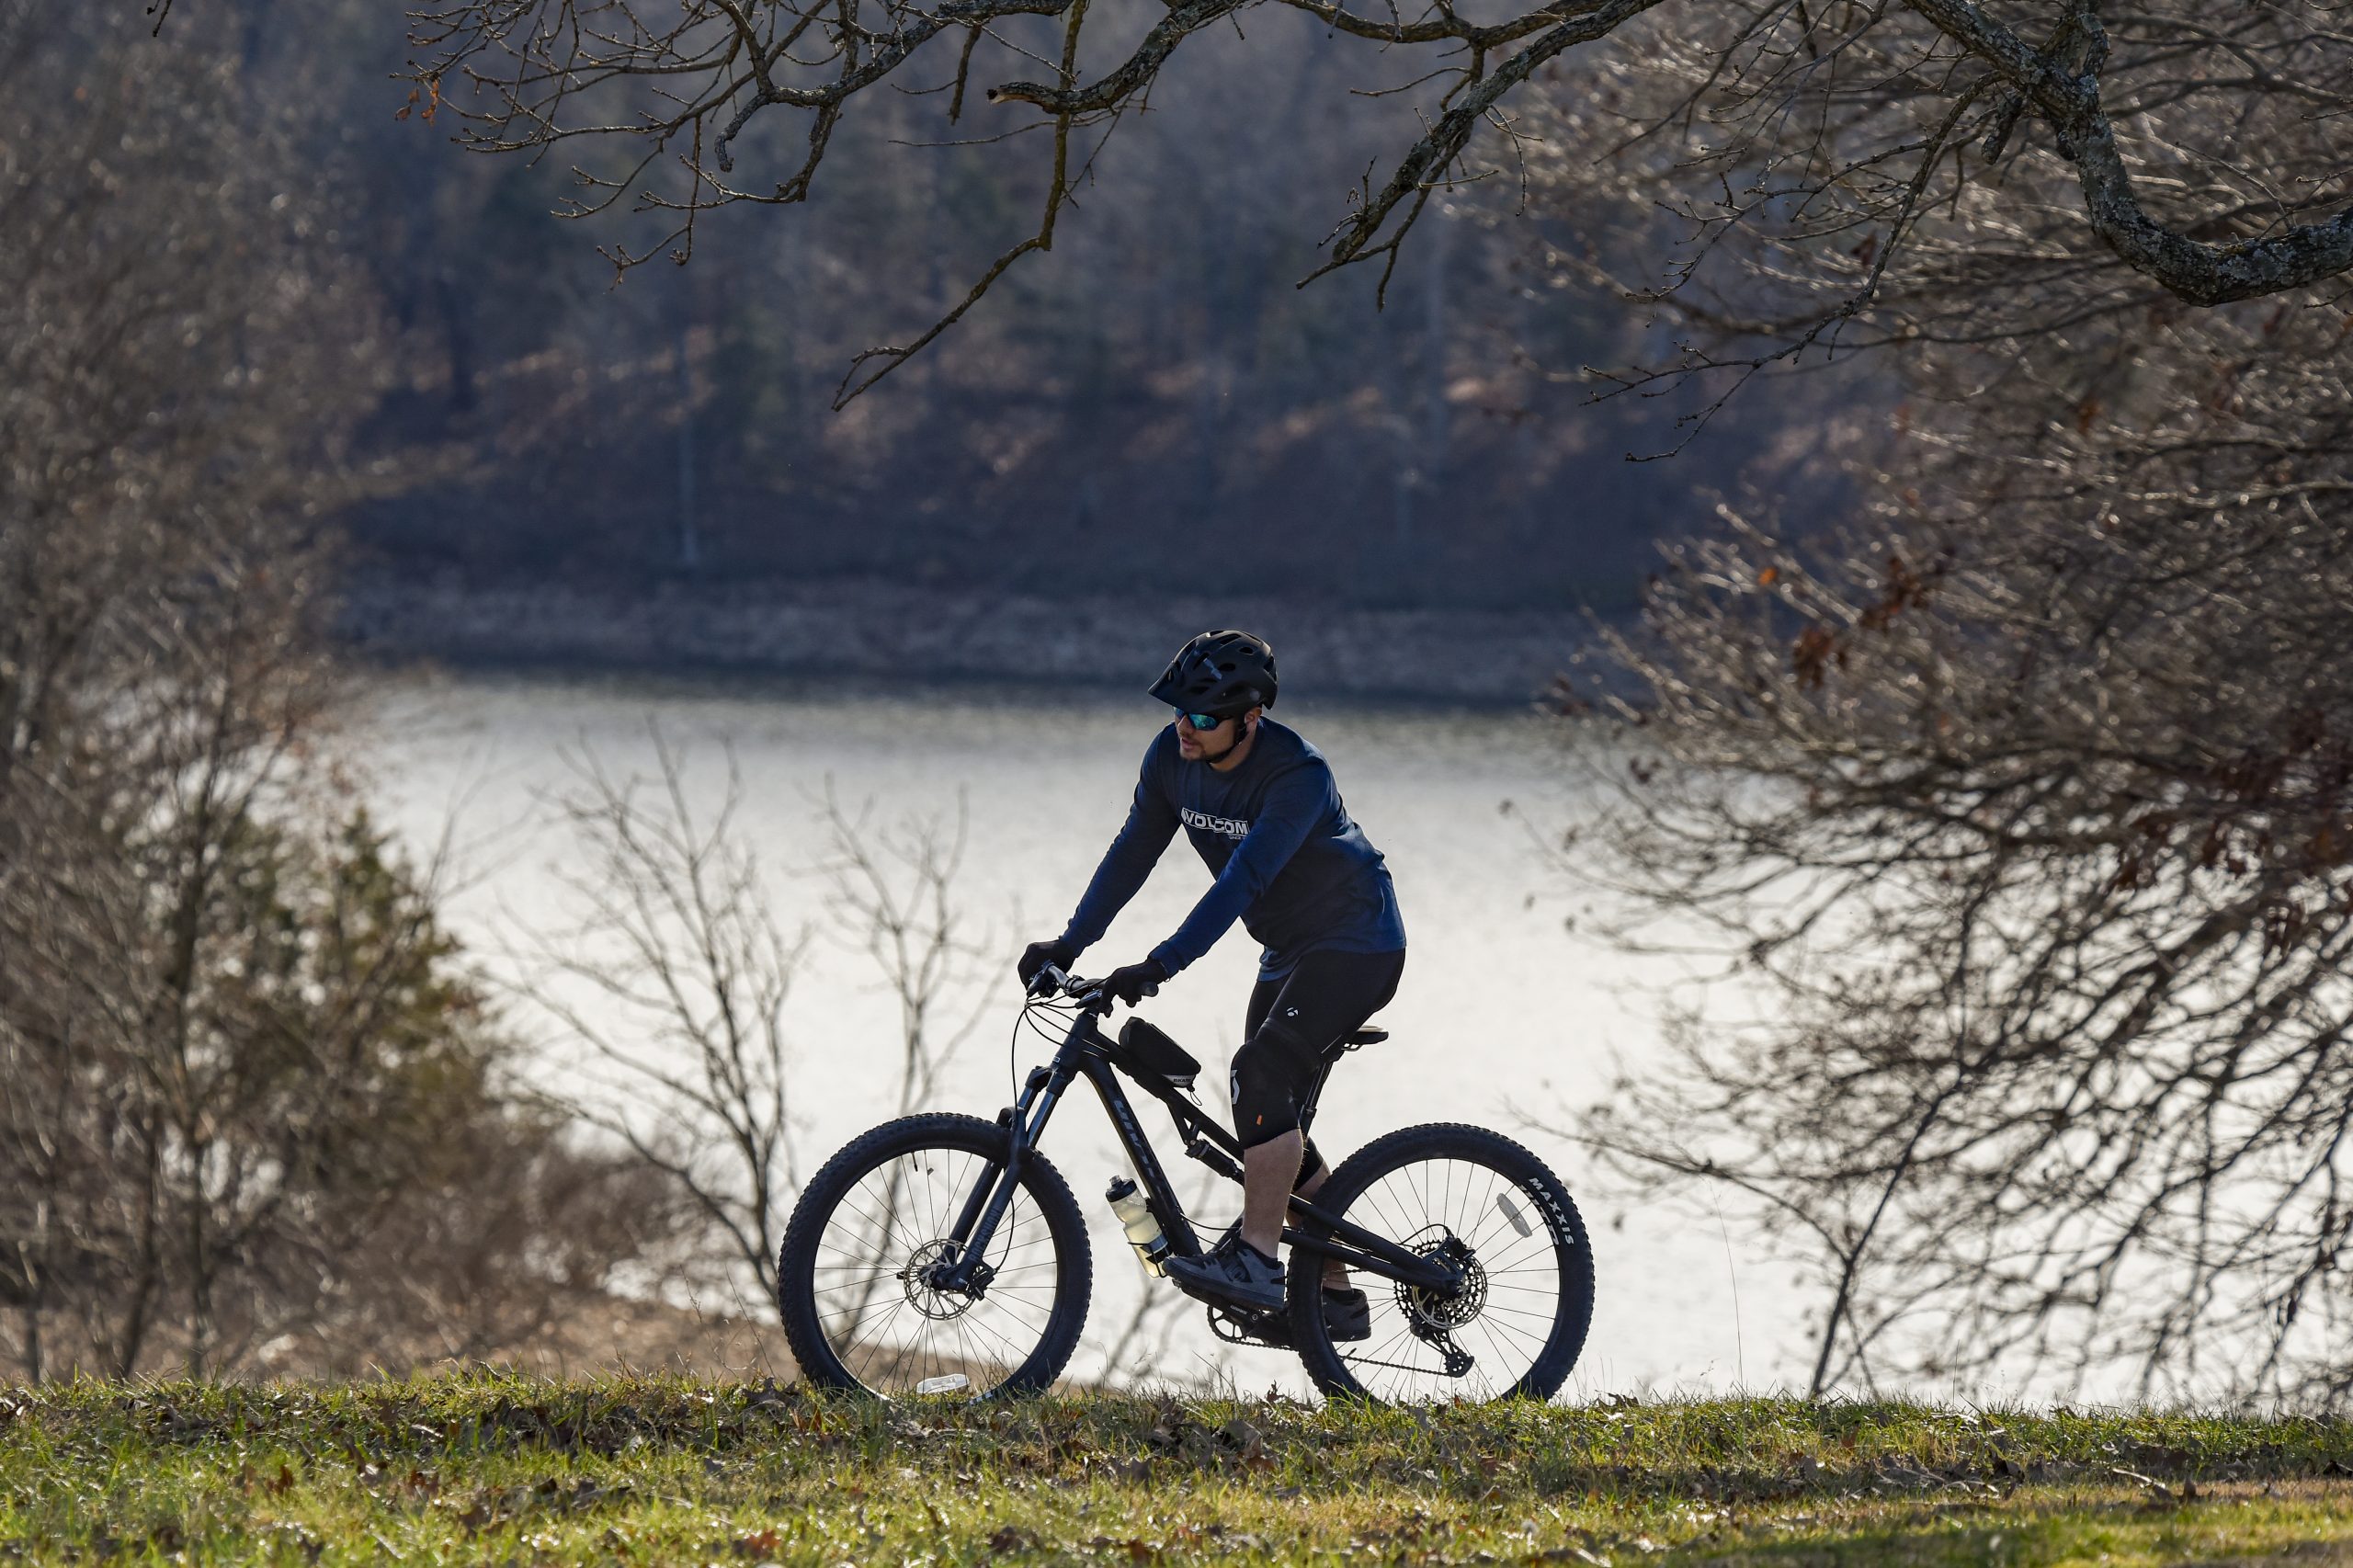 Dirt 66, the massive new trail network by Fellows Lake, is putting Springfield on the map